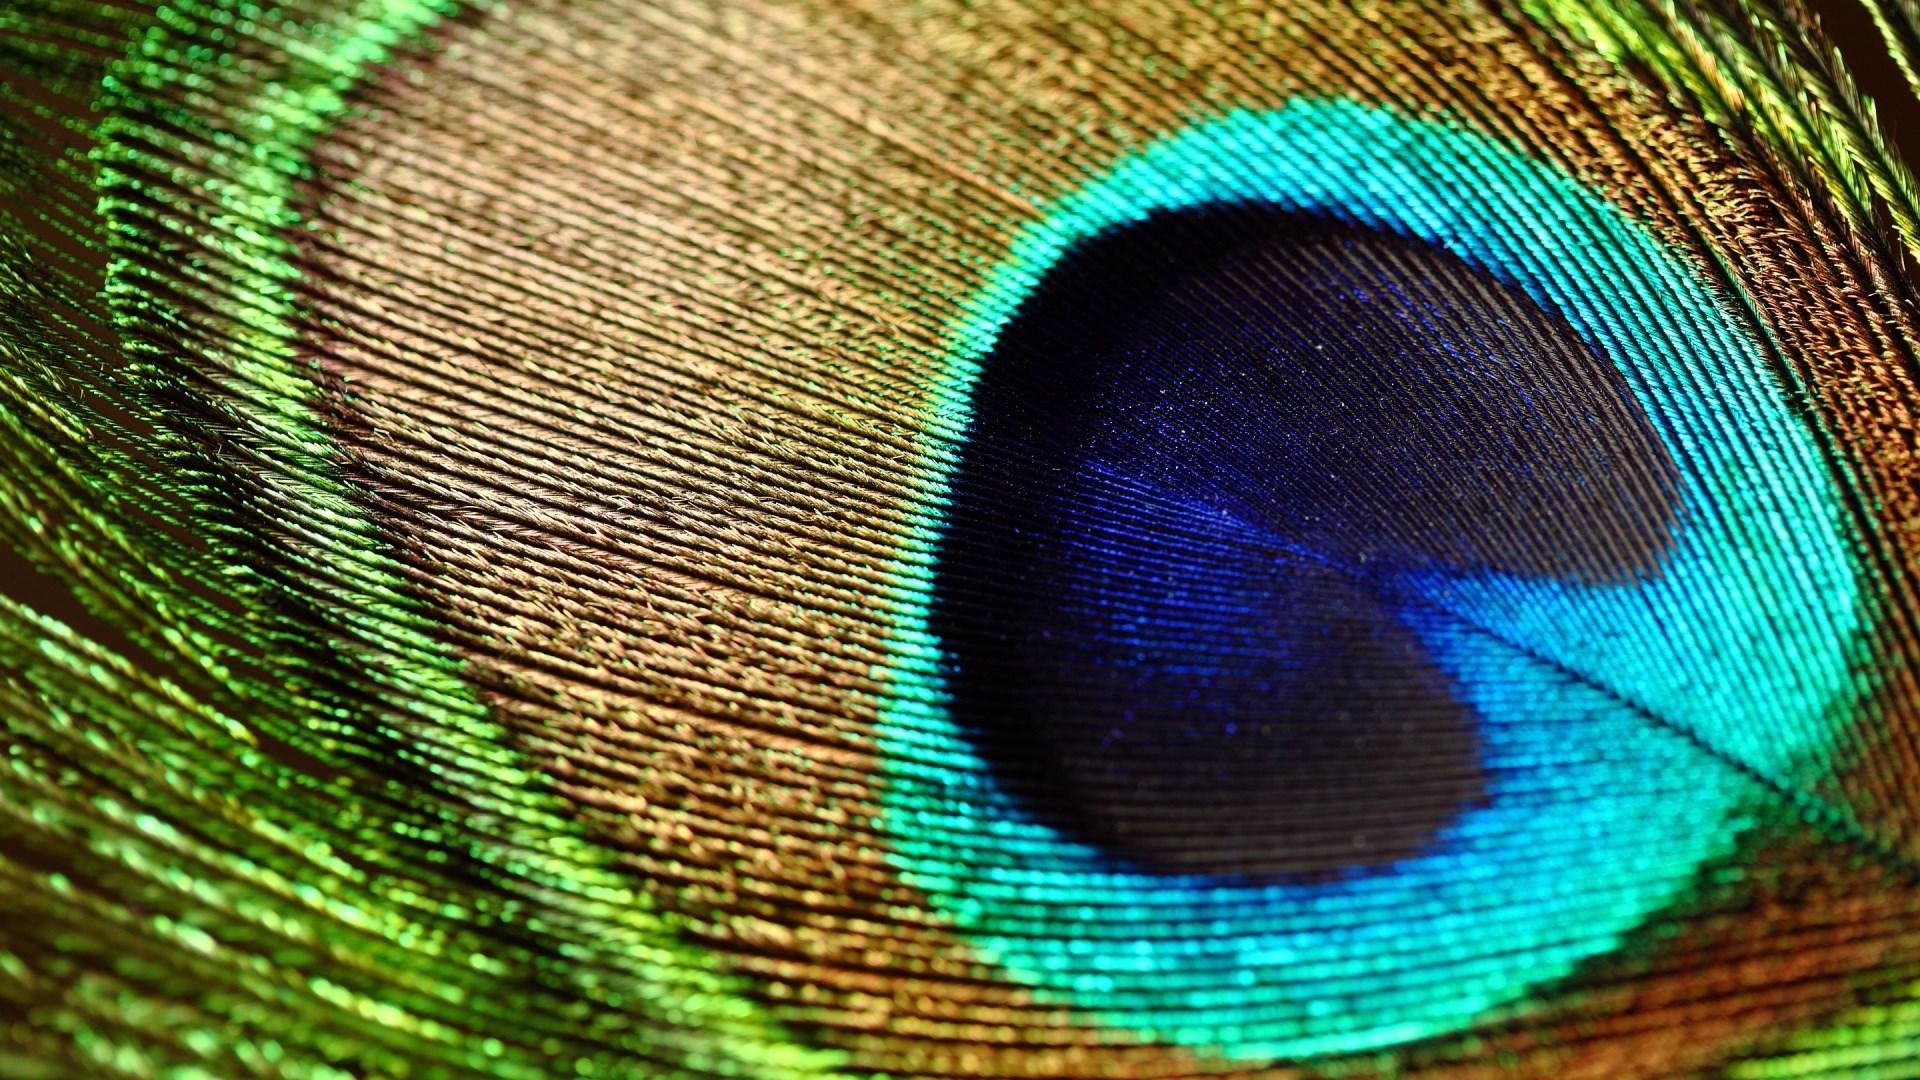 peacock feathers wallpaper hd